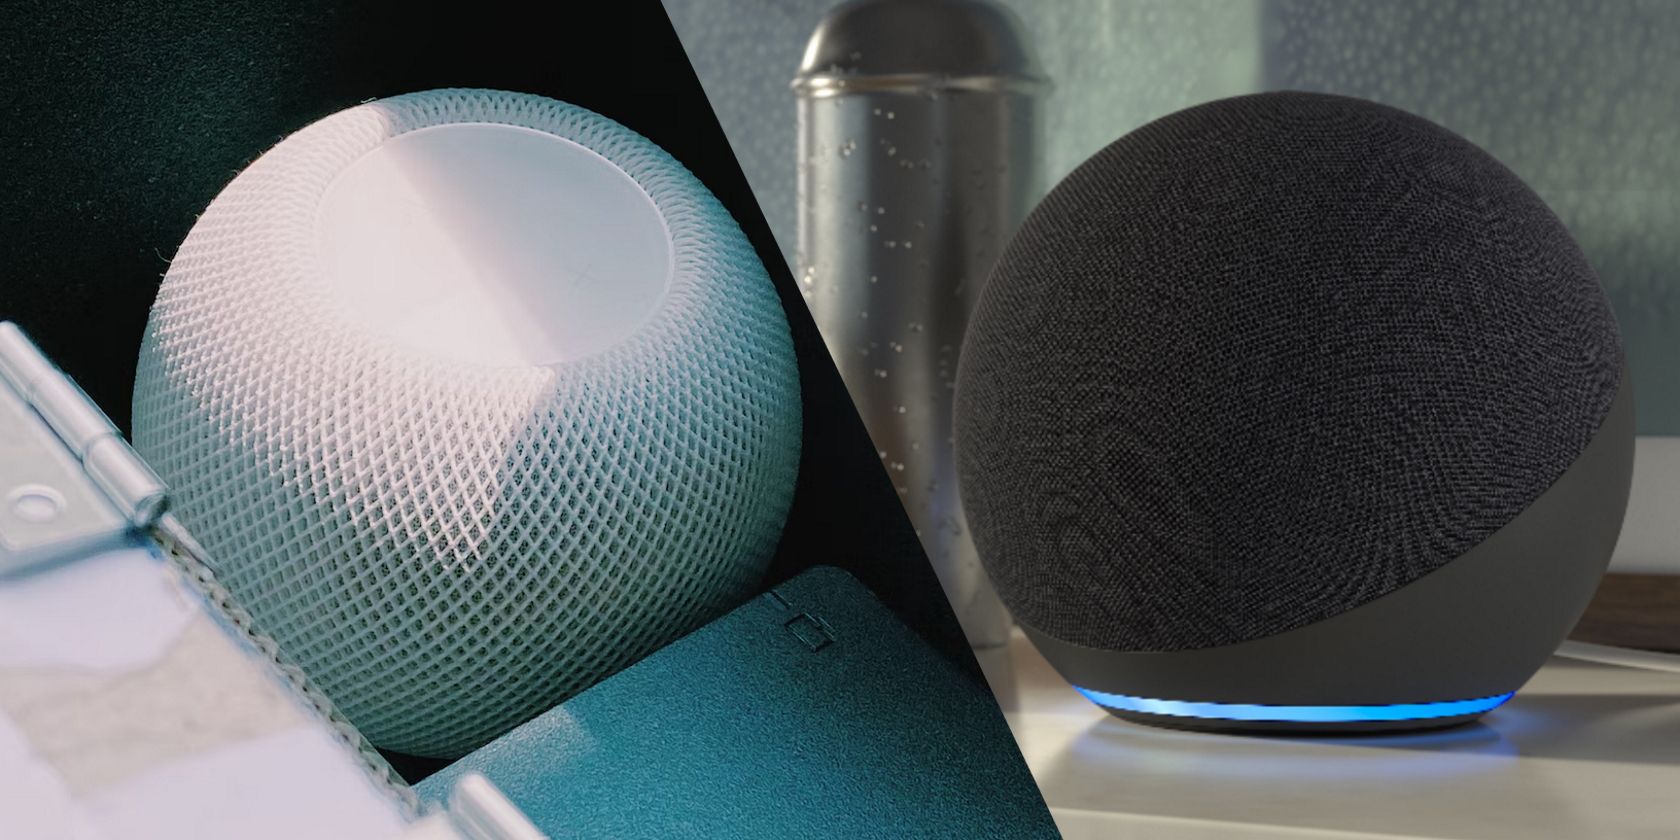 An Apple HomePod mini side-by-side with an Amazon Echo